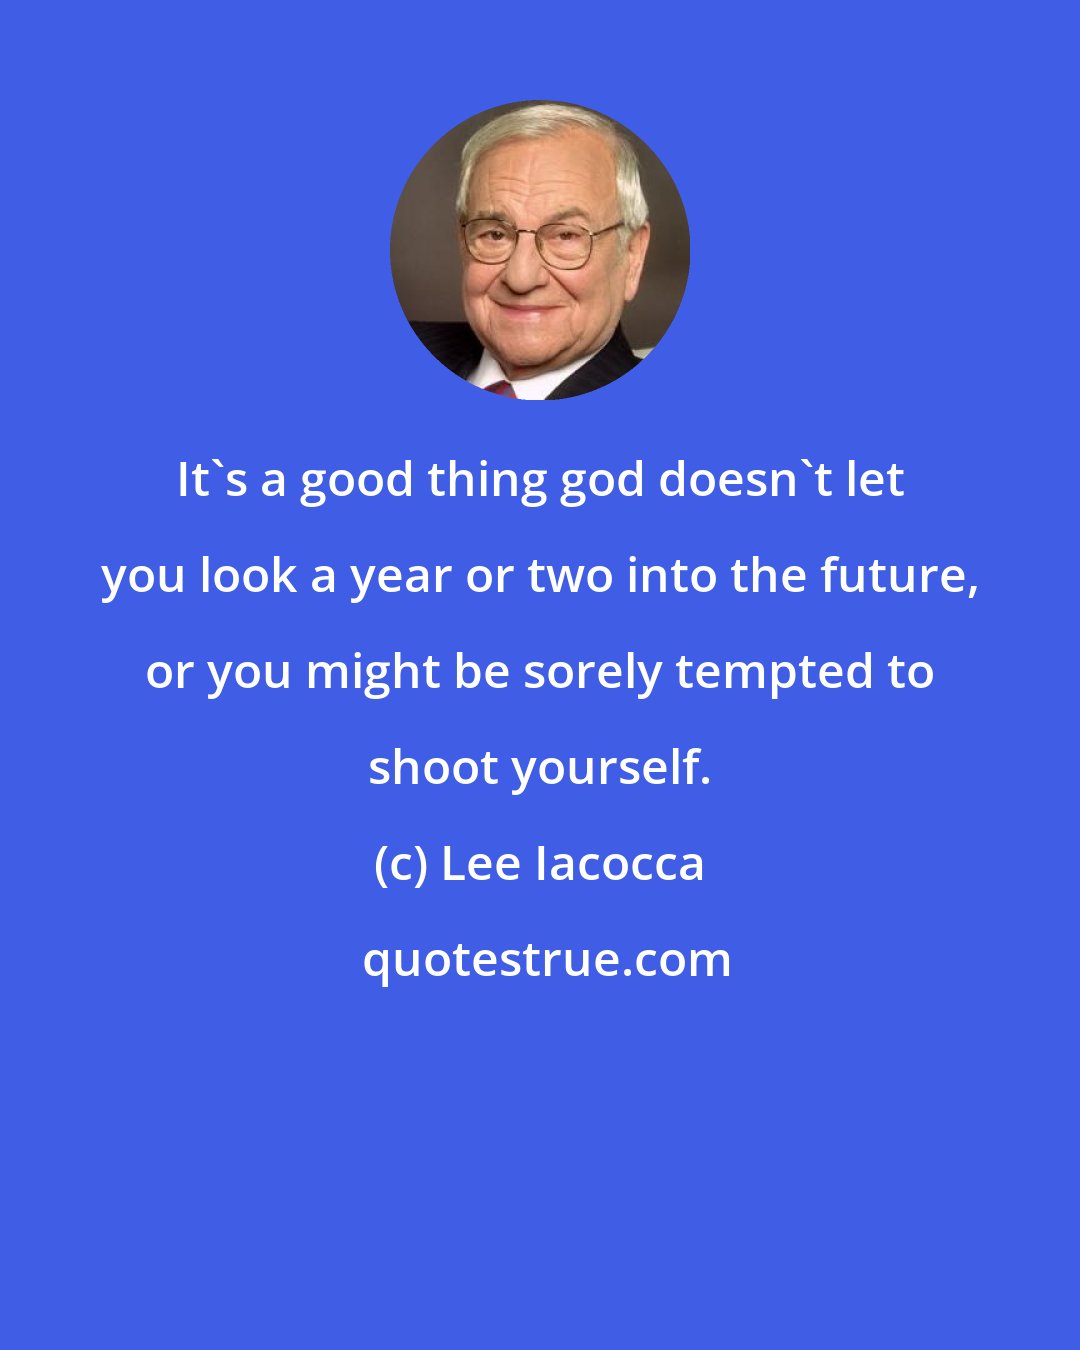 Lee Iacocca: It's a good thing god doesn't let you look a year or two into the future, or you might be sorely tempted to shoot yourself.